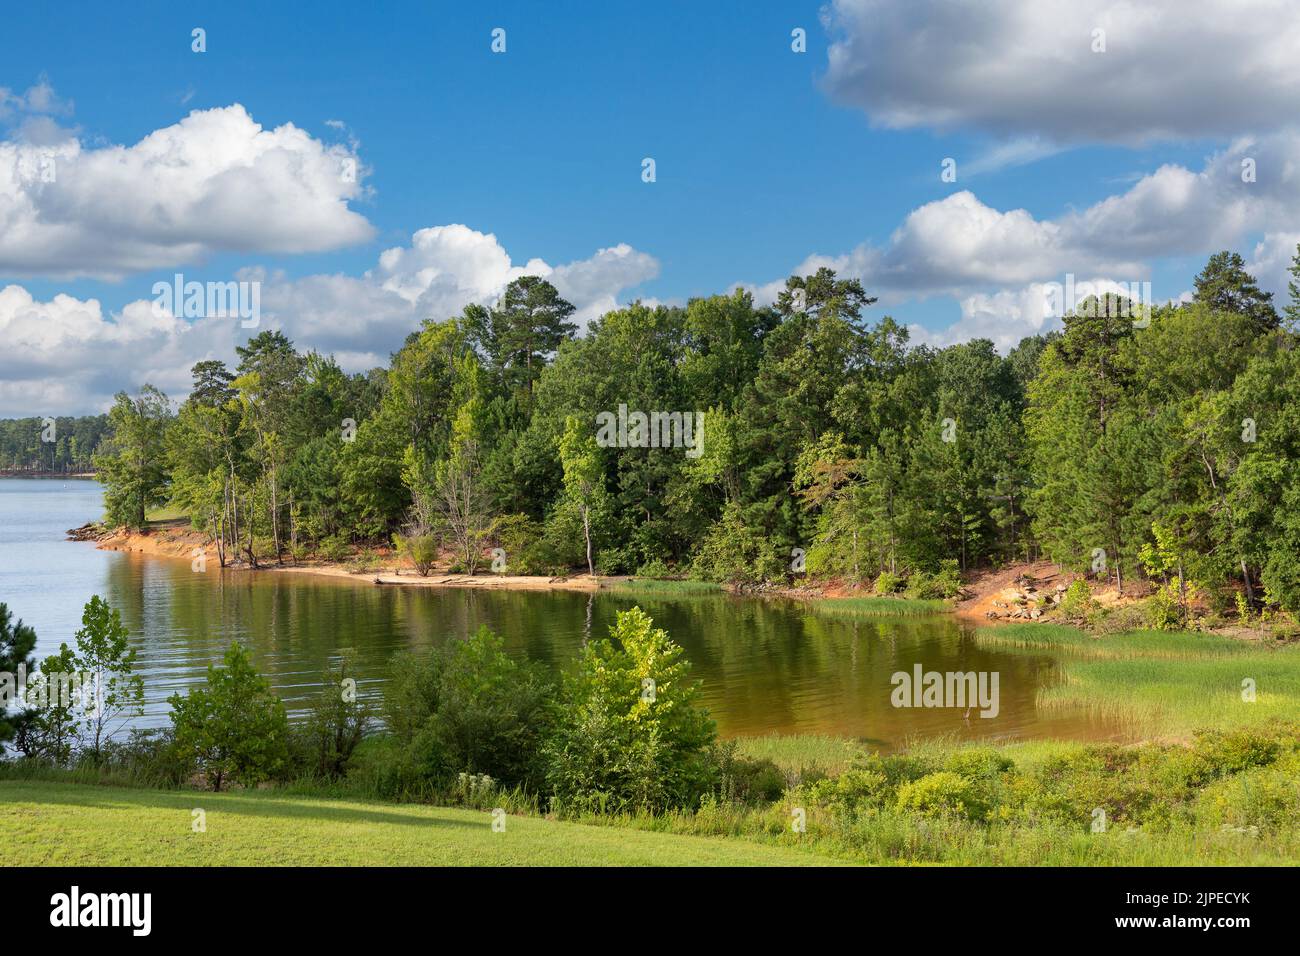 Beautiful Kerr Lake in Virginia US. Manmade lake lined with sandy beaches surrounded by forests. Created by damming the river Dan. Stock Photo